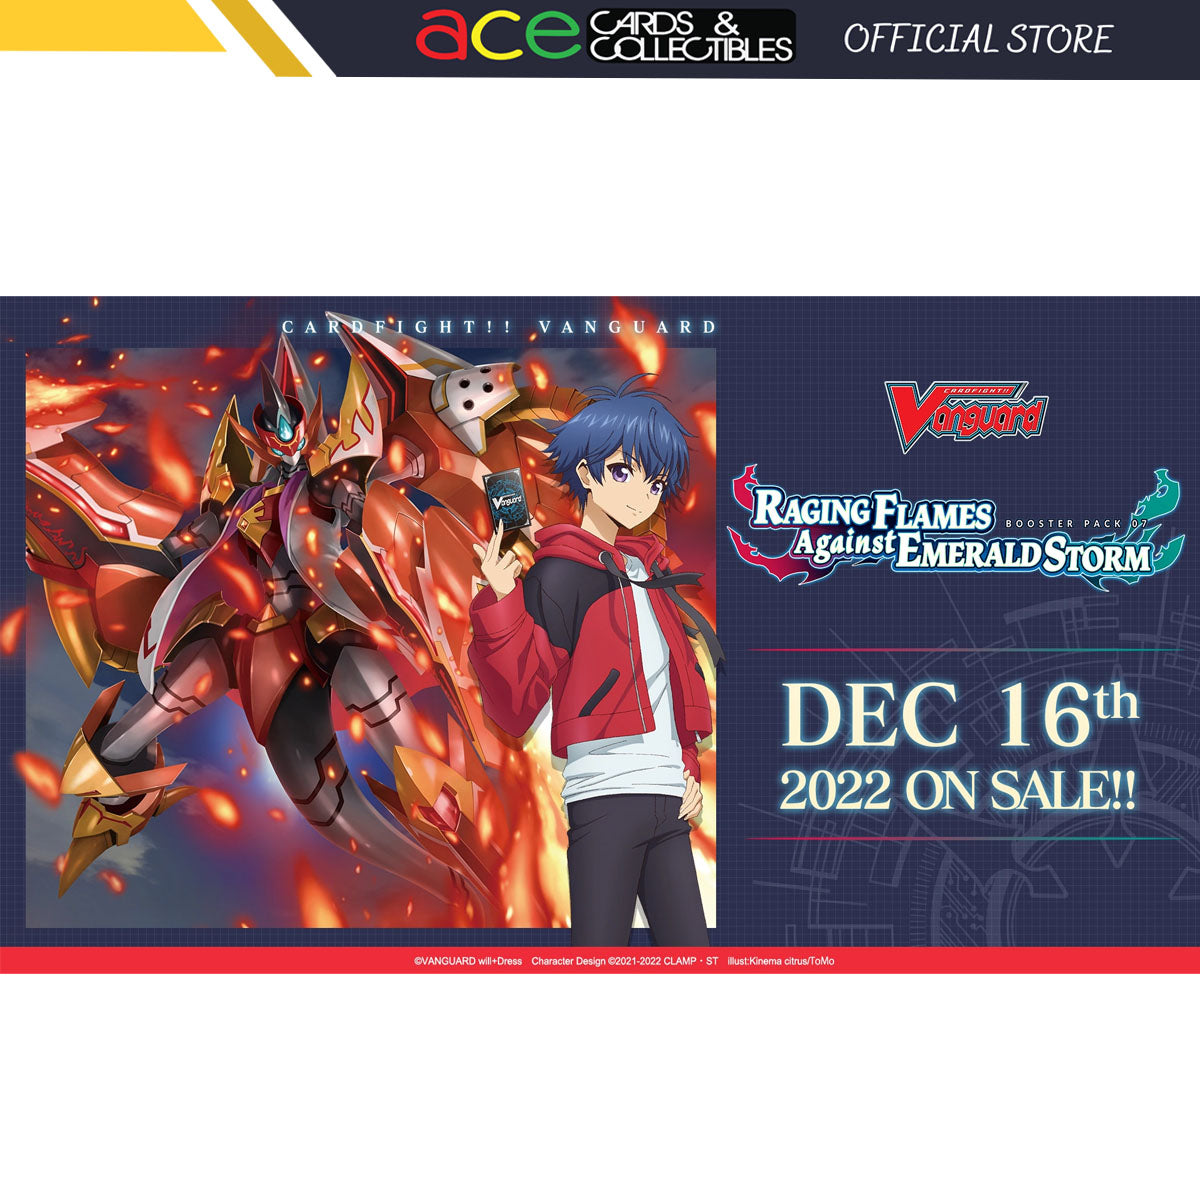 Cardfight!! Vanguard overDress Raging Flames Against Emerald Storm [VGE-D-BT07] (English)-Booster Pack (Random)-Bushiroad-Ace Cards & Collectibles